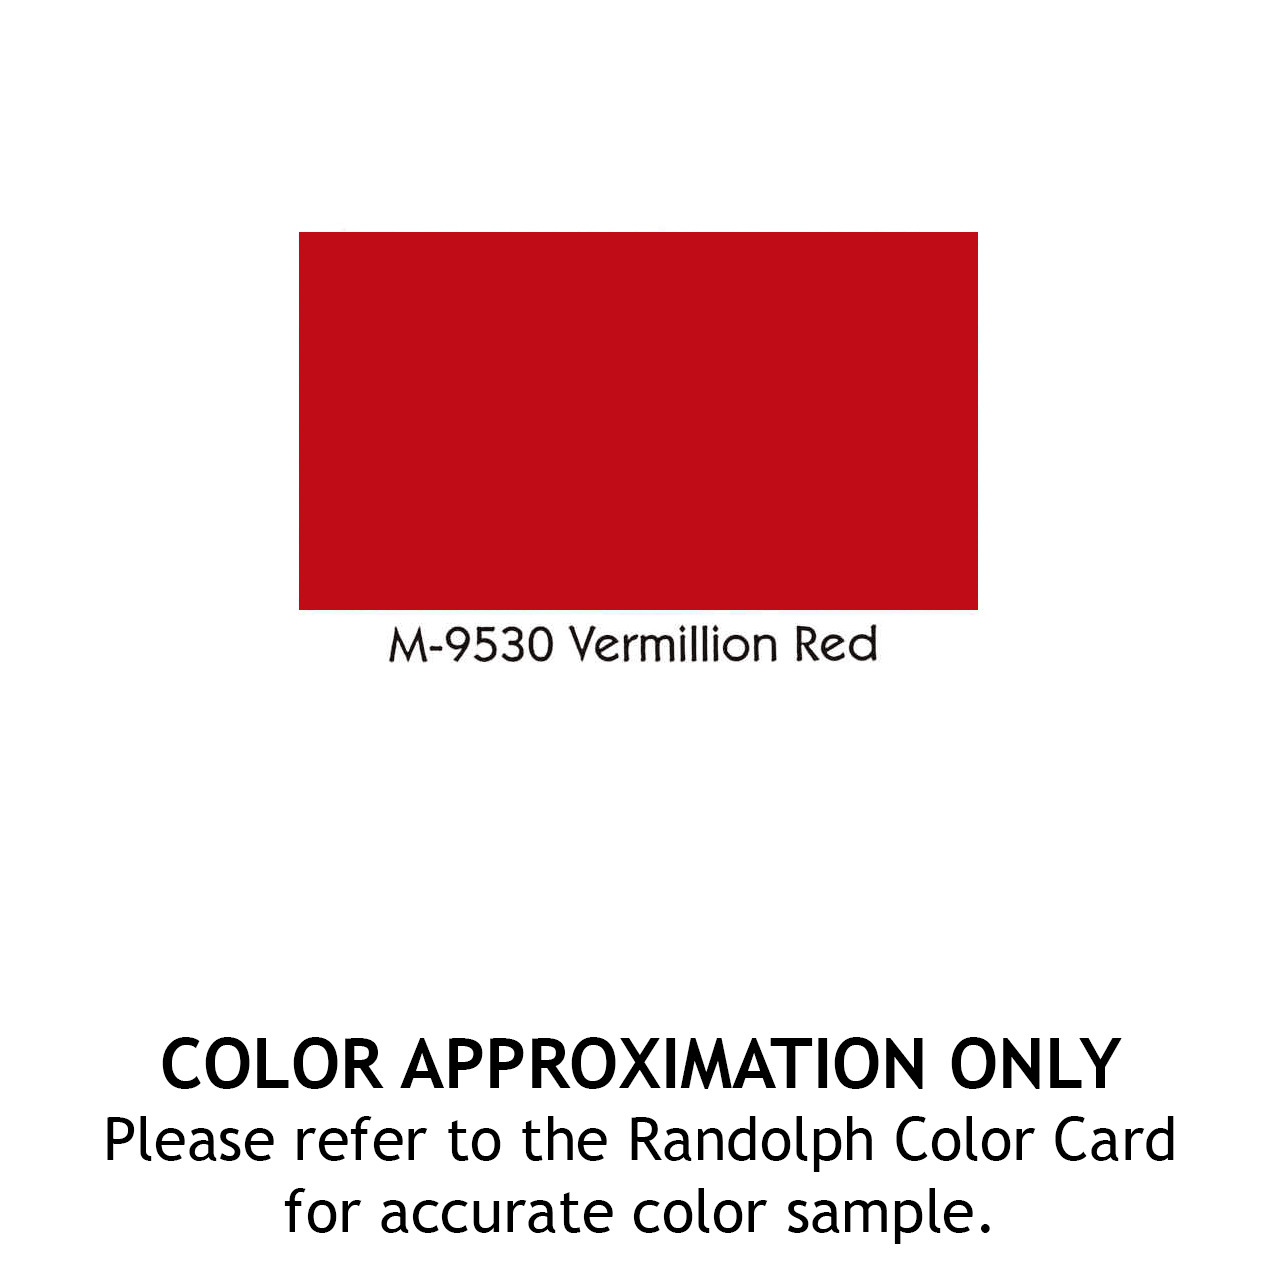 RANDOLPH COLORED BUTYRATE DOPE - VERMILION RED